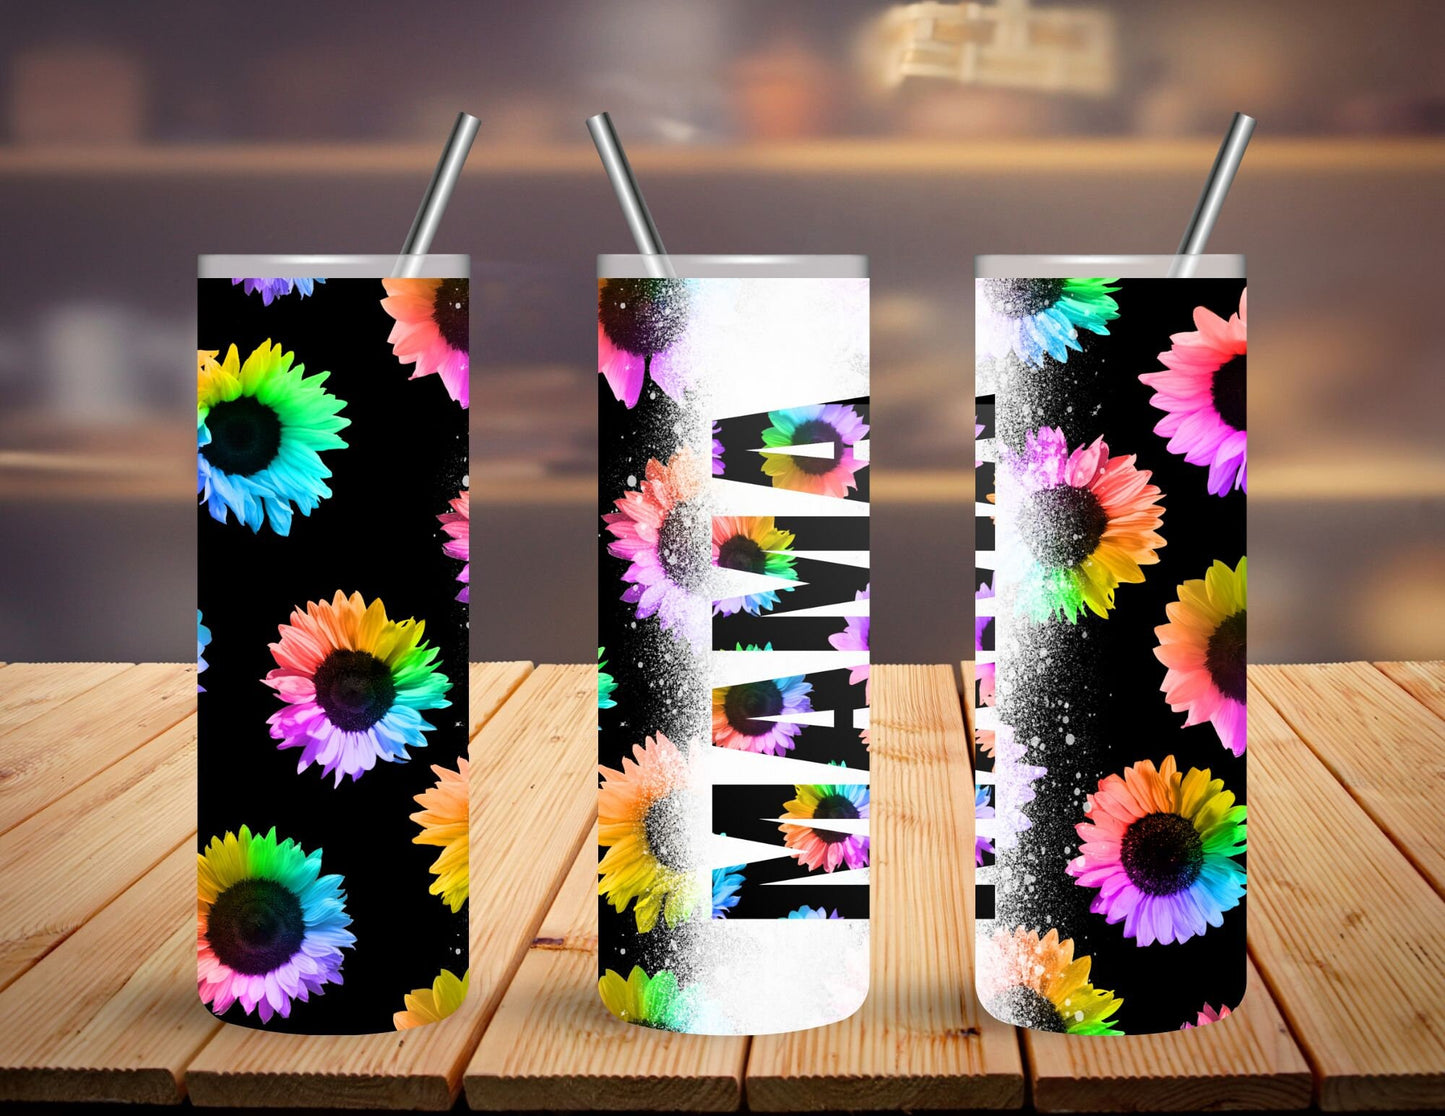 Stay refreshed in style with our Neon Mama Flowers 20 oz stainless steel tumbler